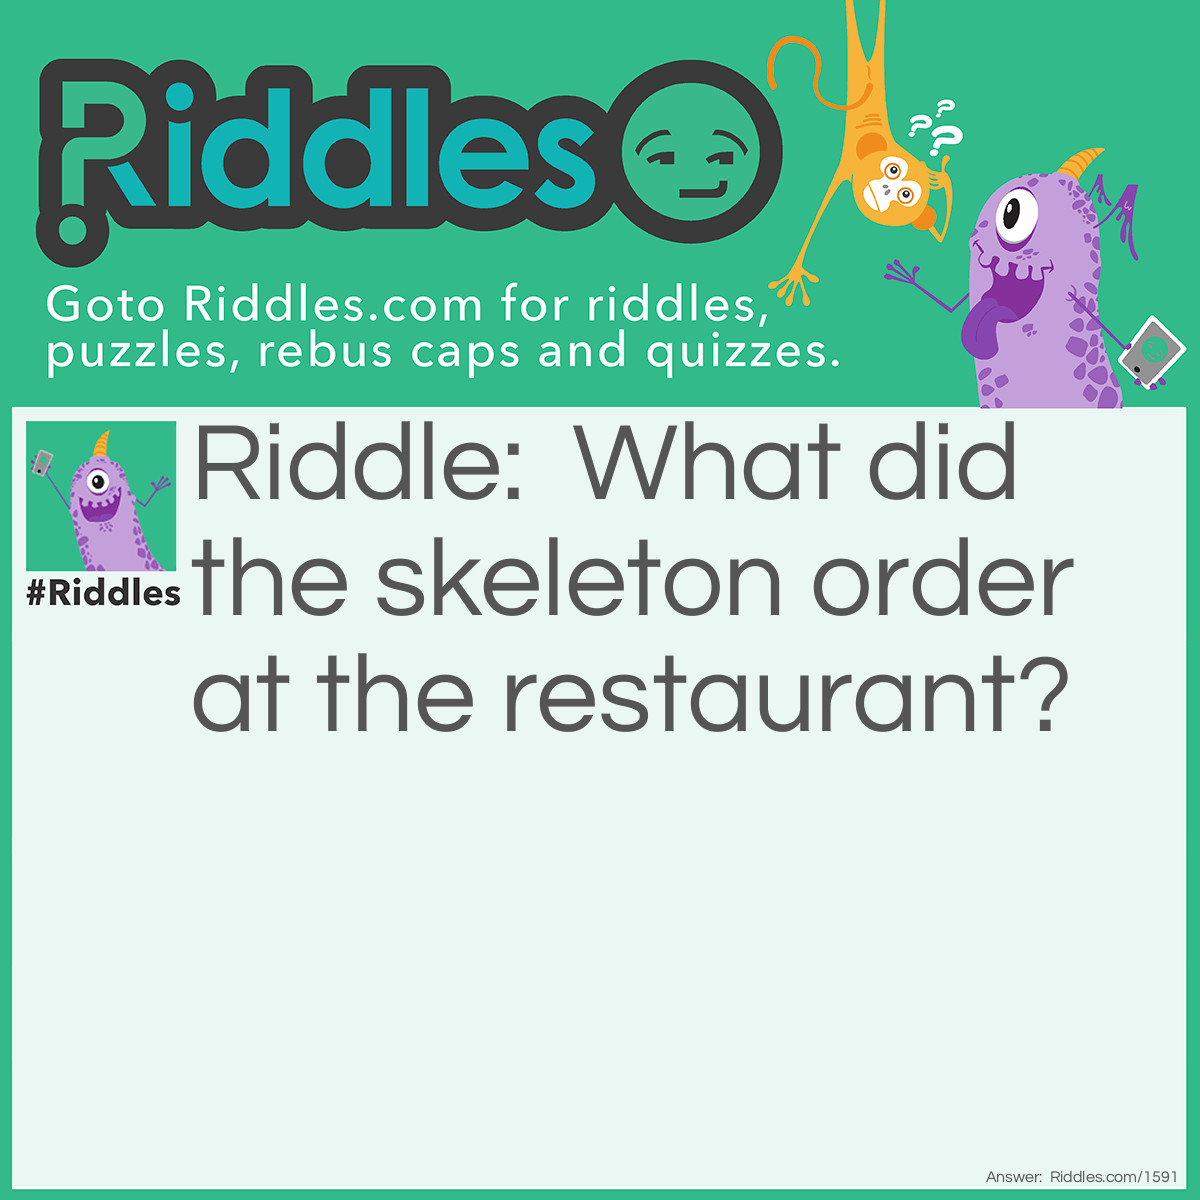 Riddle: What did the skeleton order at the restaurant? Answer: Spare-ribs!